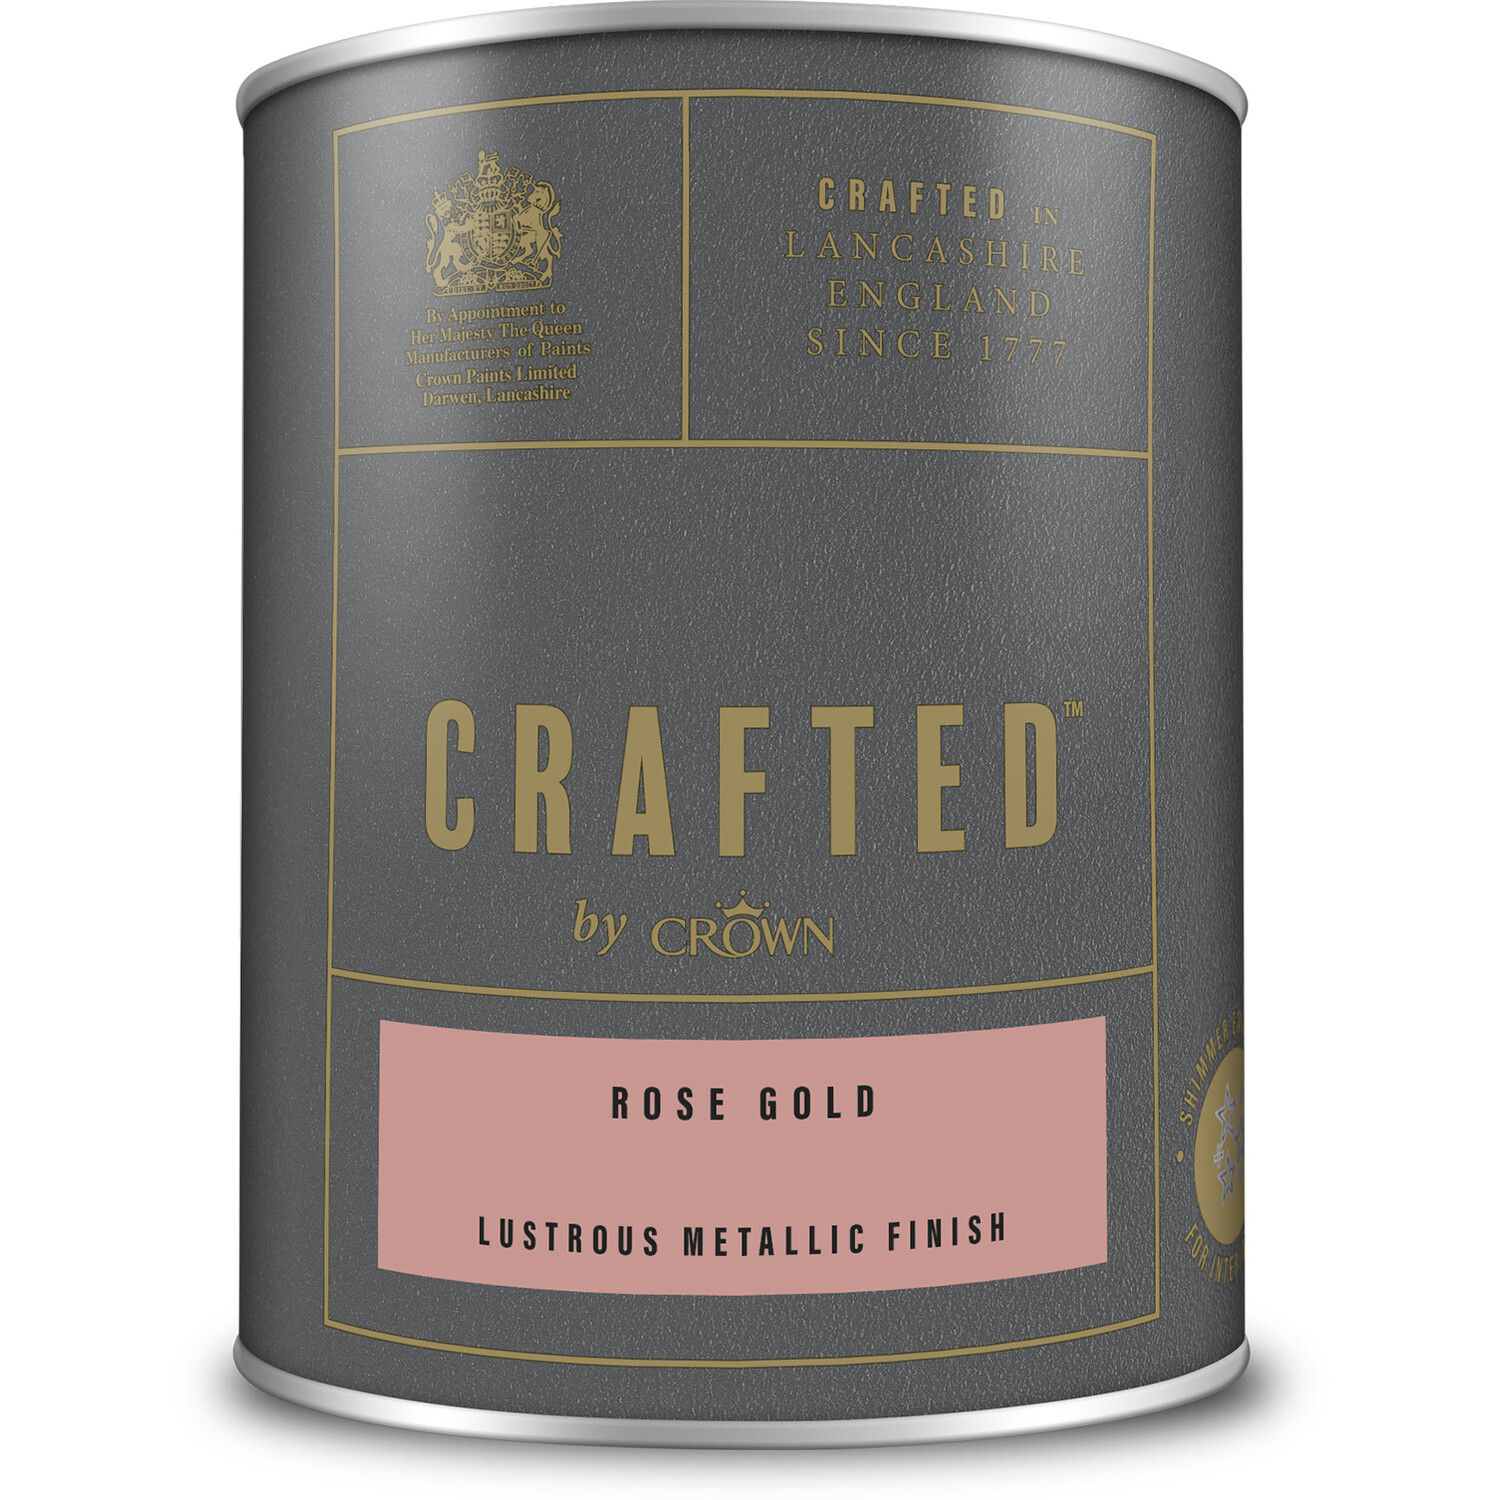 Crown Crafted Walls Wood and Metal Rose Gold Lustrous Metallic Shimmer Emulsion Paint 1.25L Image 2